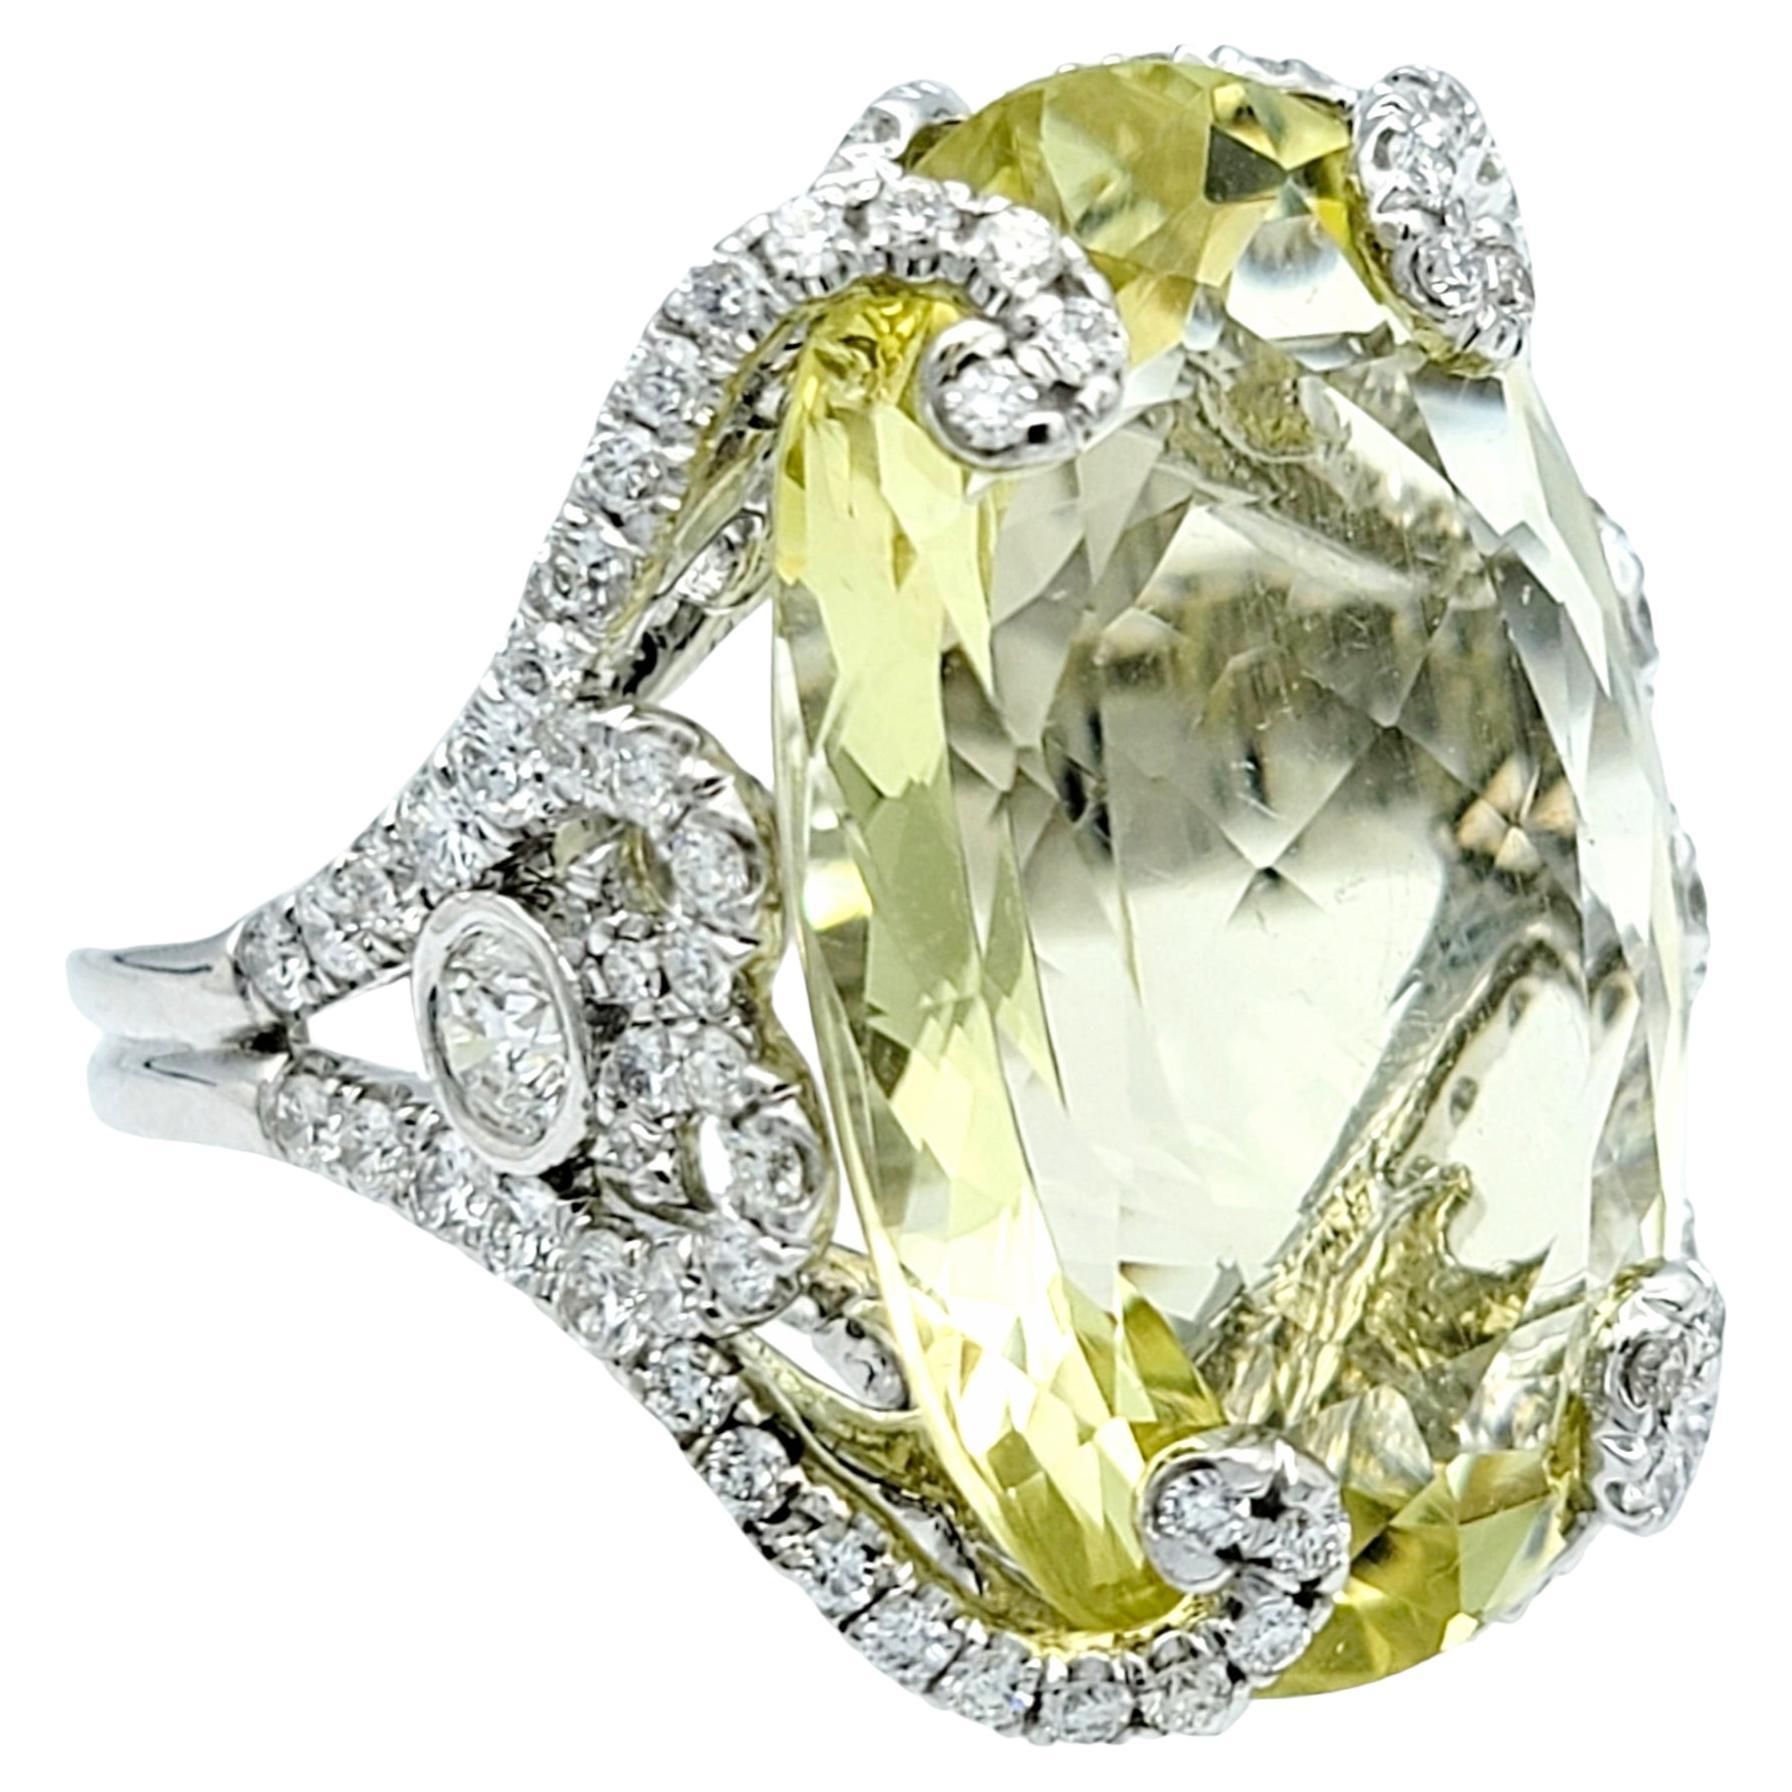 Huge 31.0 Carat Oval Cut Prasiolite Cocktail Ring with Diamond Accents 14K Gold